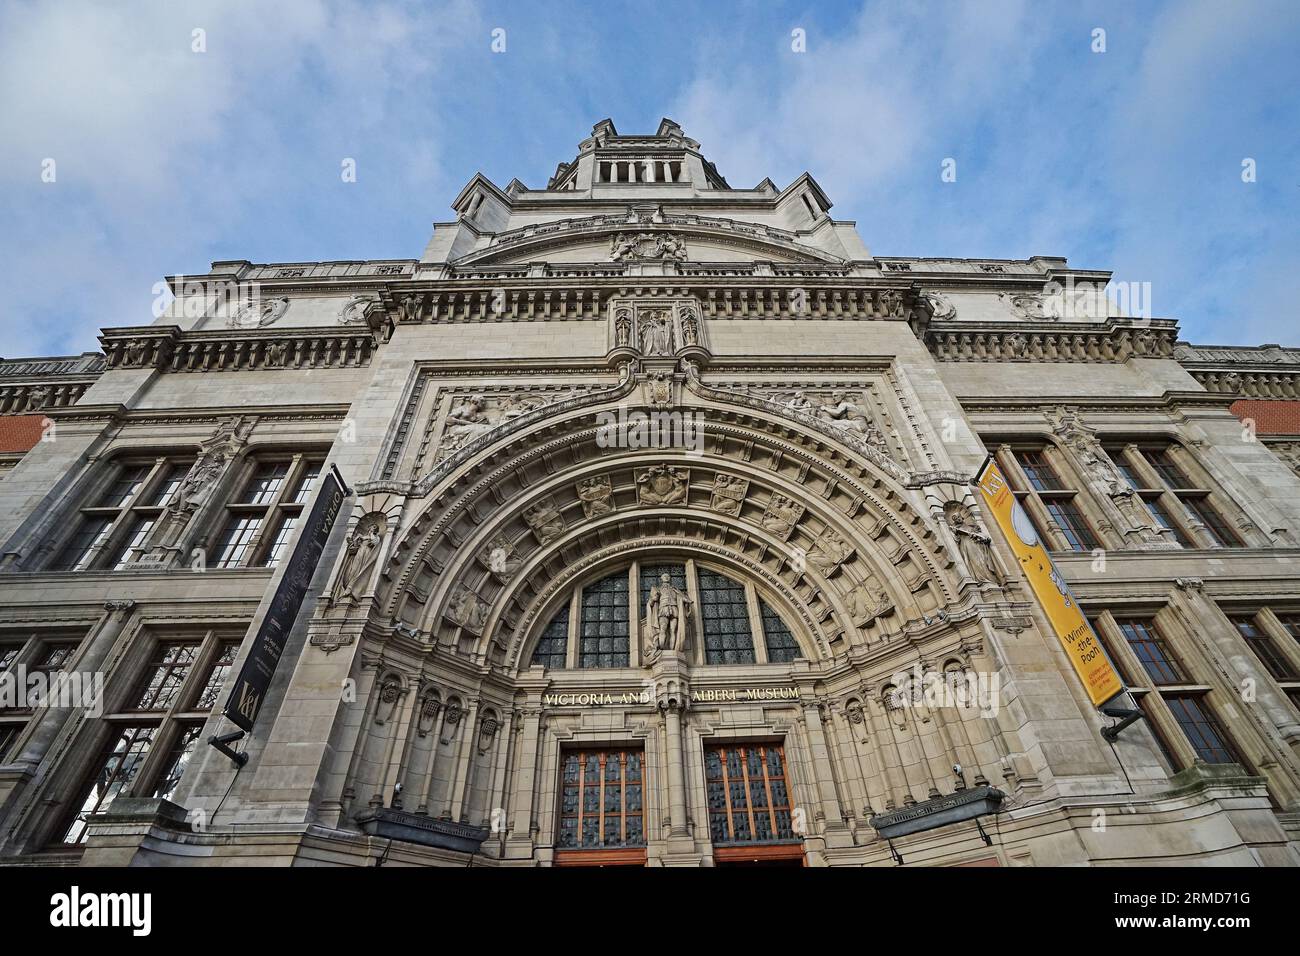 Exterior architecture and front facade design of 'Victoria and Albert Museum',  the world's largest museum of decorative arts and design- England, UK Stock  Photo - Alamy